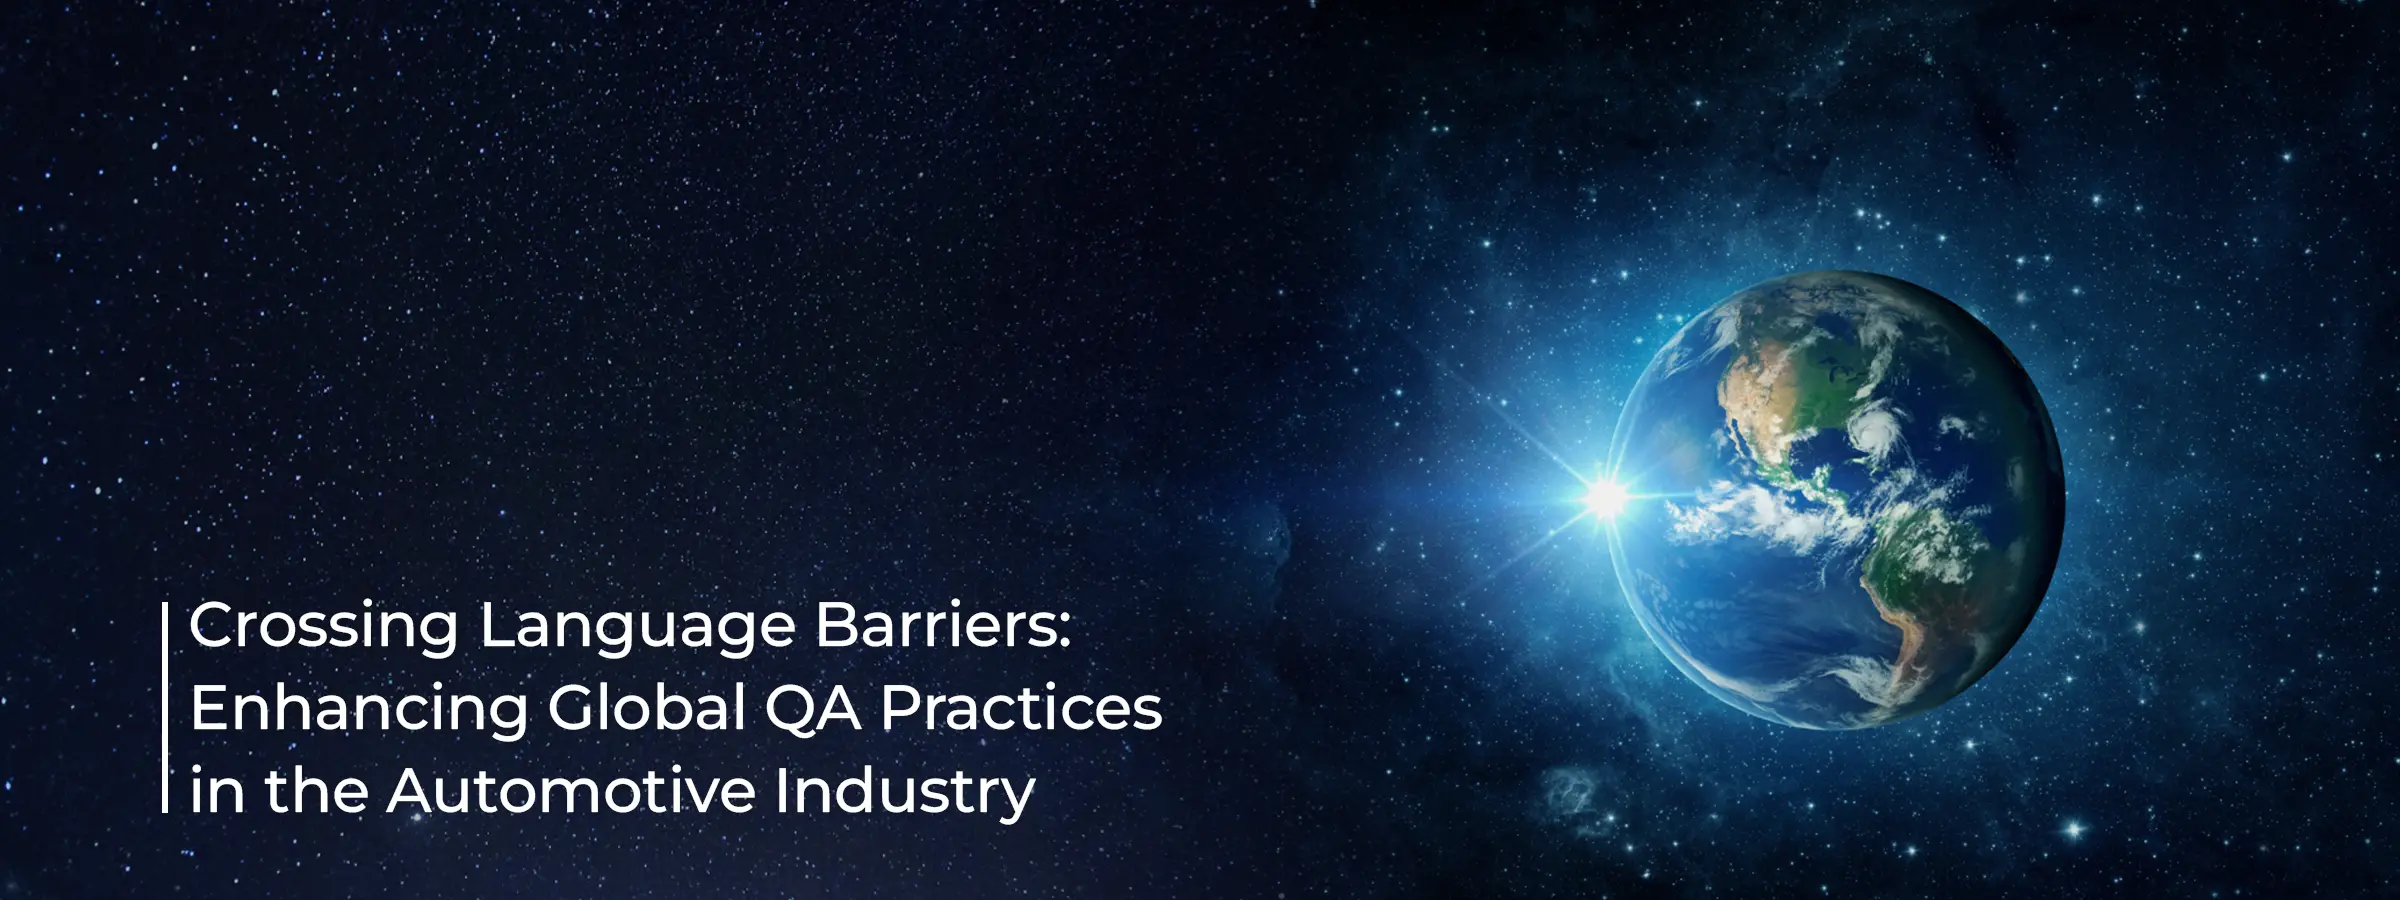 enhancing-global-qa-practices-in-the-automotive-industry